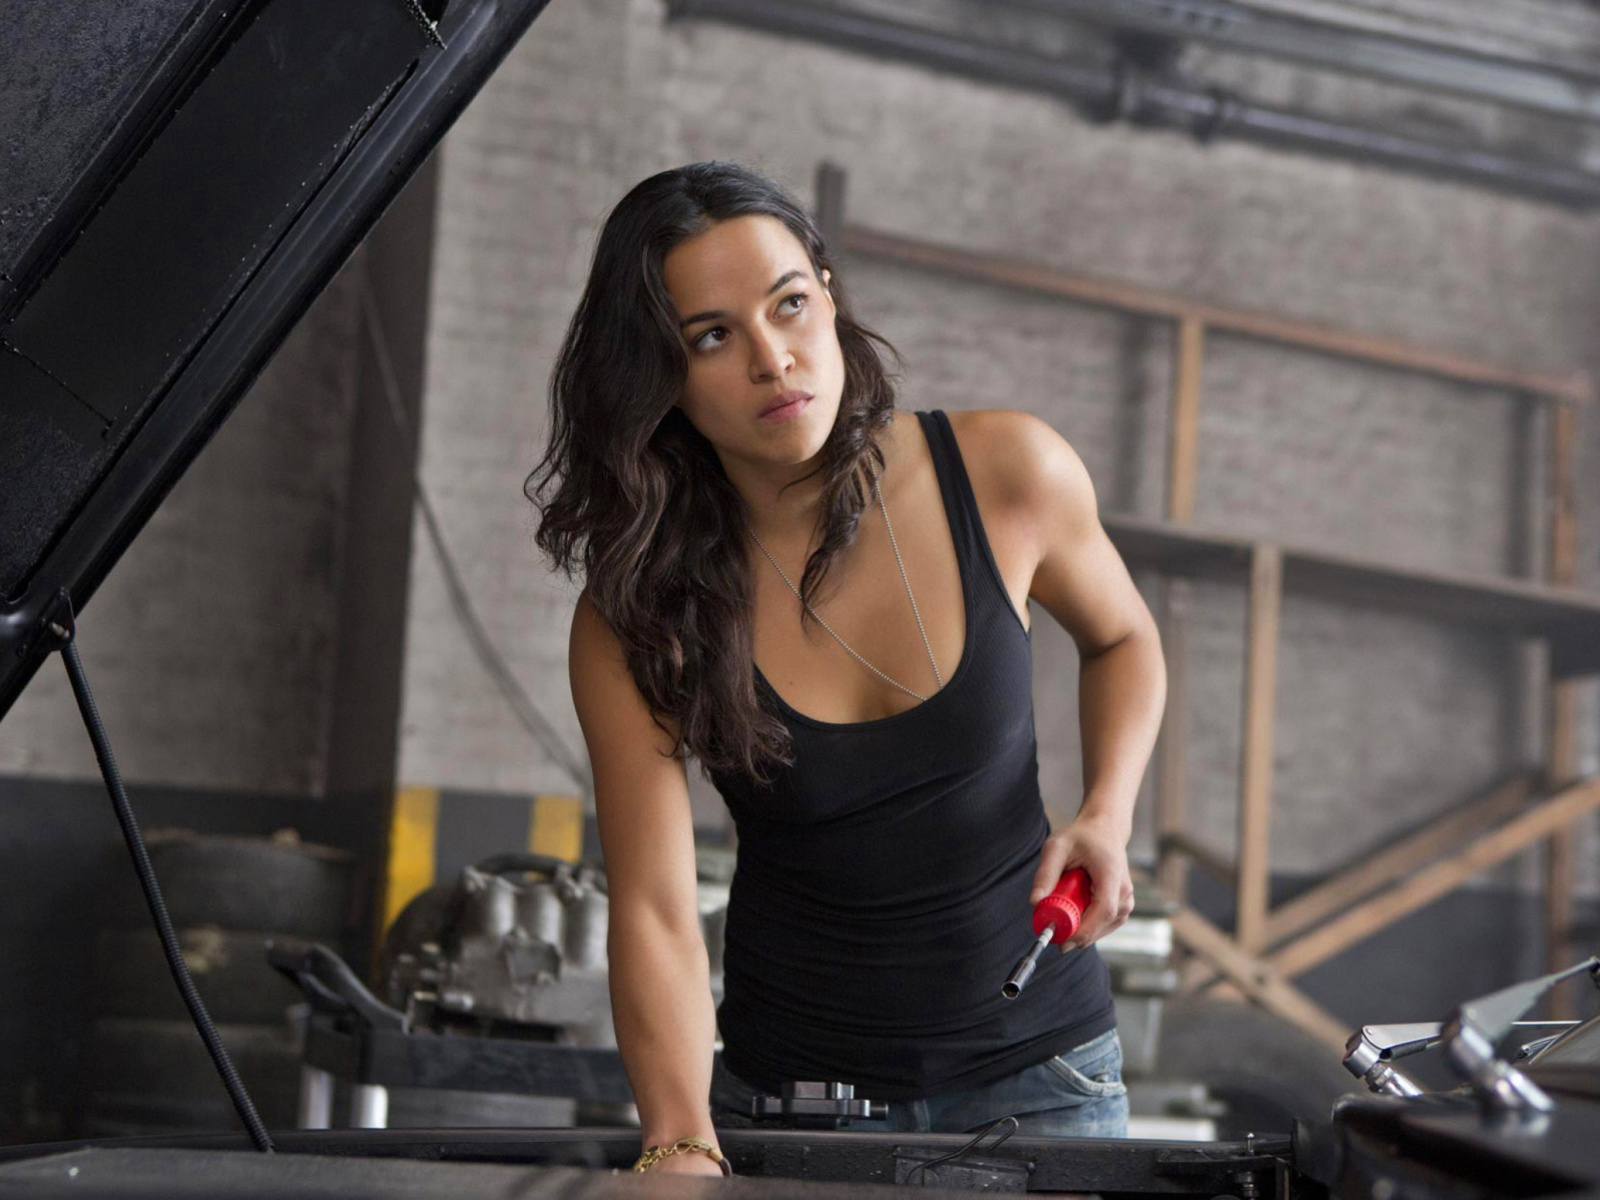 Fast and Furious 6 Letty Ortiz wallpaper 1600x1200